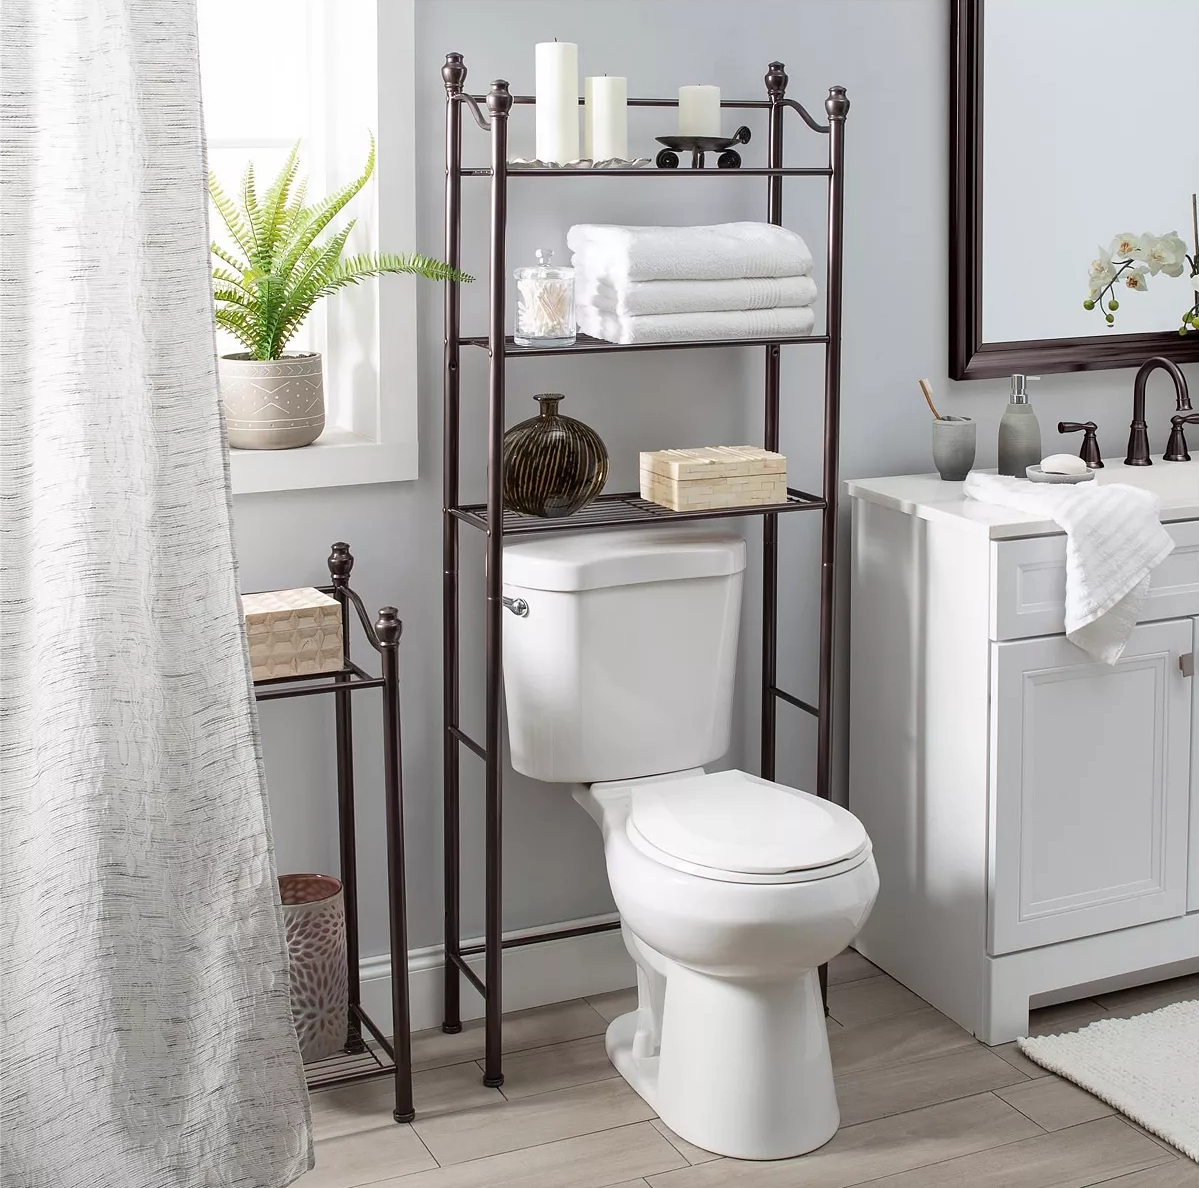 10 Great Bathroom Organization Ideas to Permanently Get Rid of Clutter